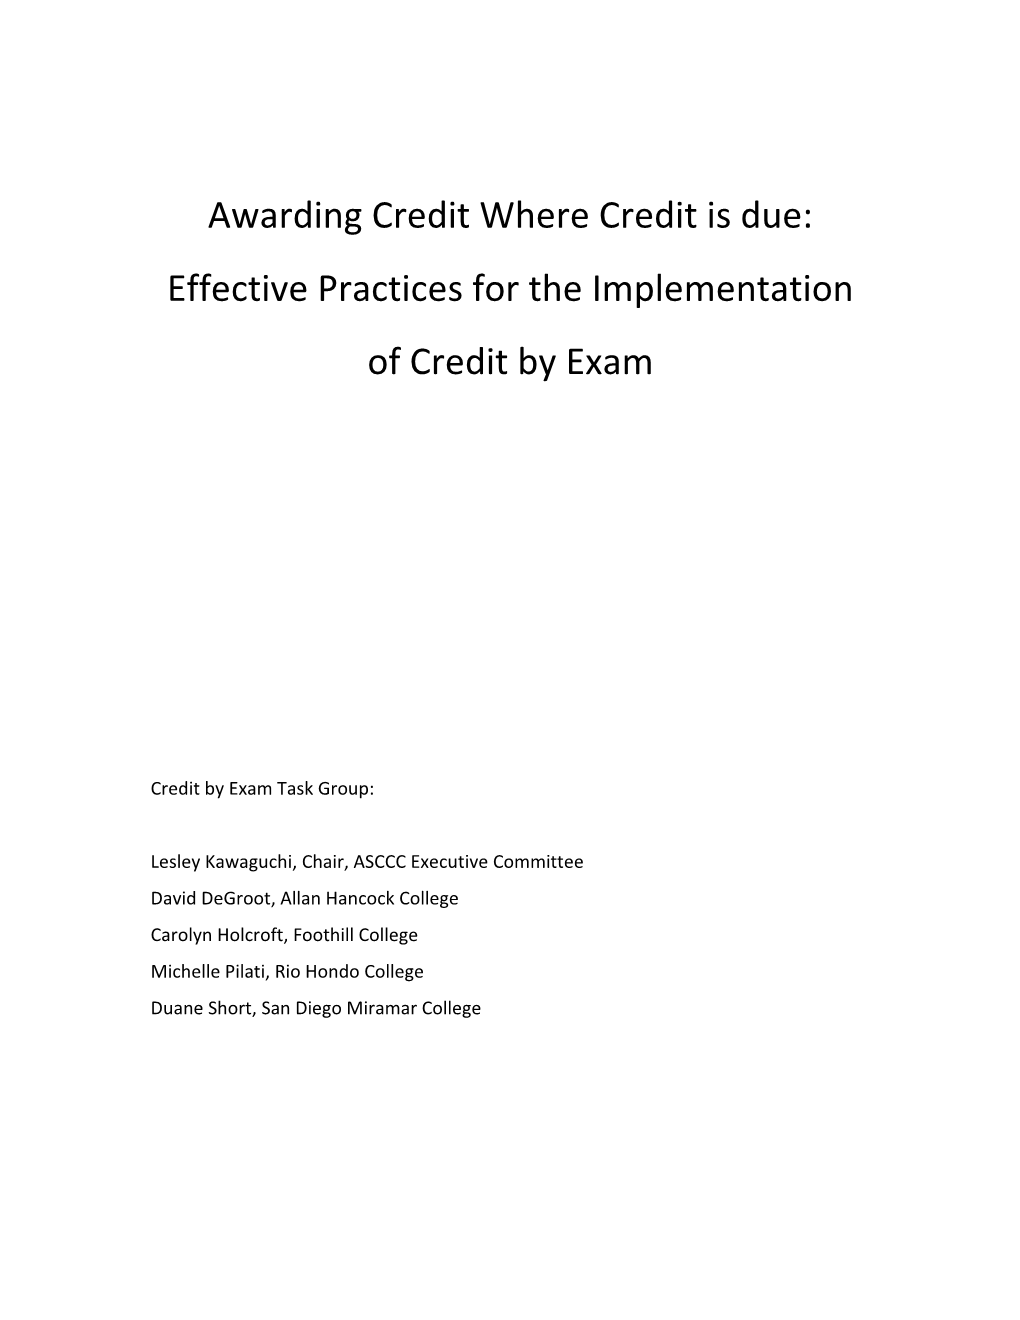 Awarding Credit Where Credit Is Due: Effective Practices for the Implementation of Credit by Exam